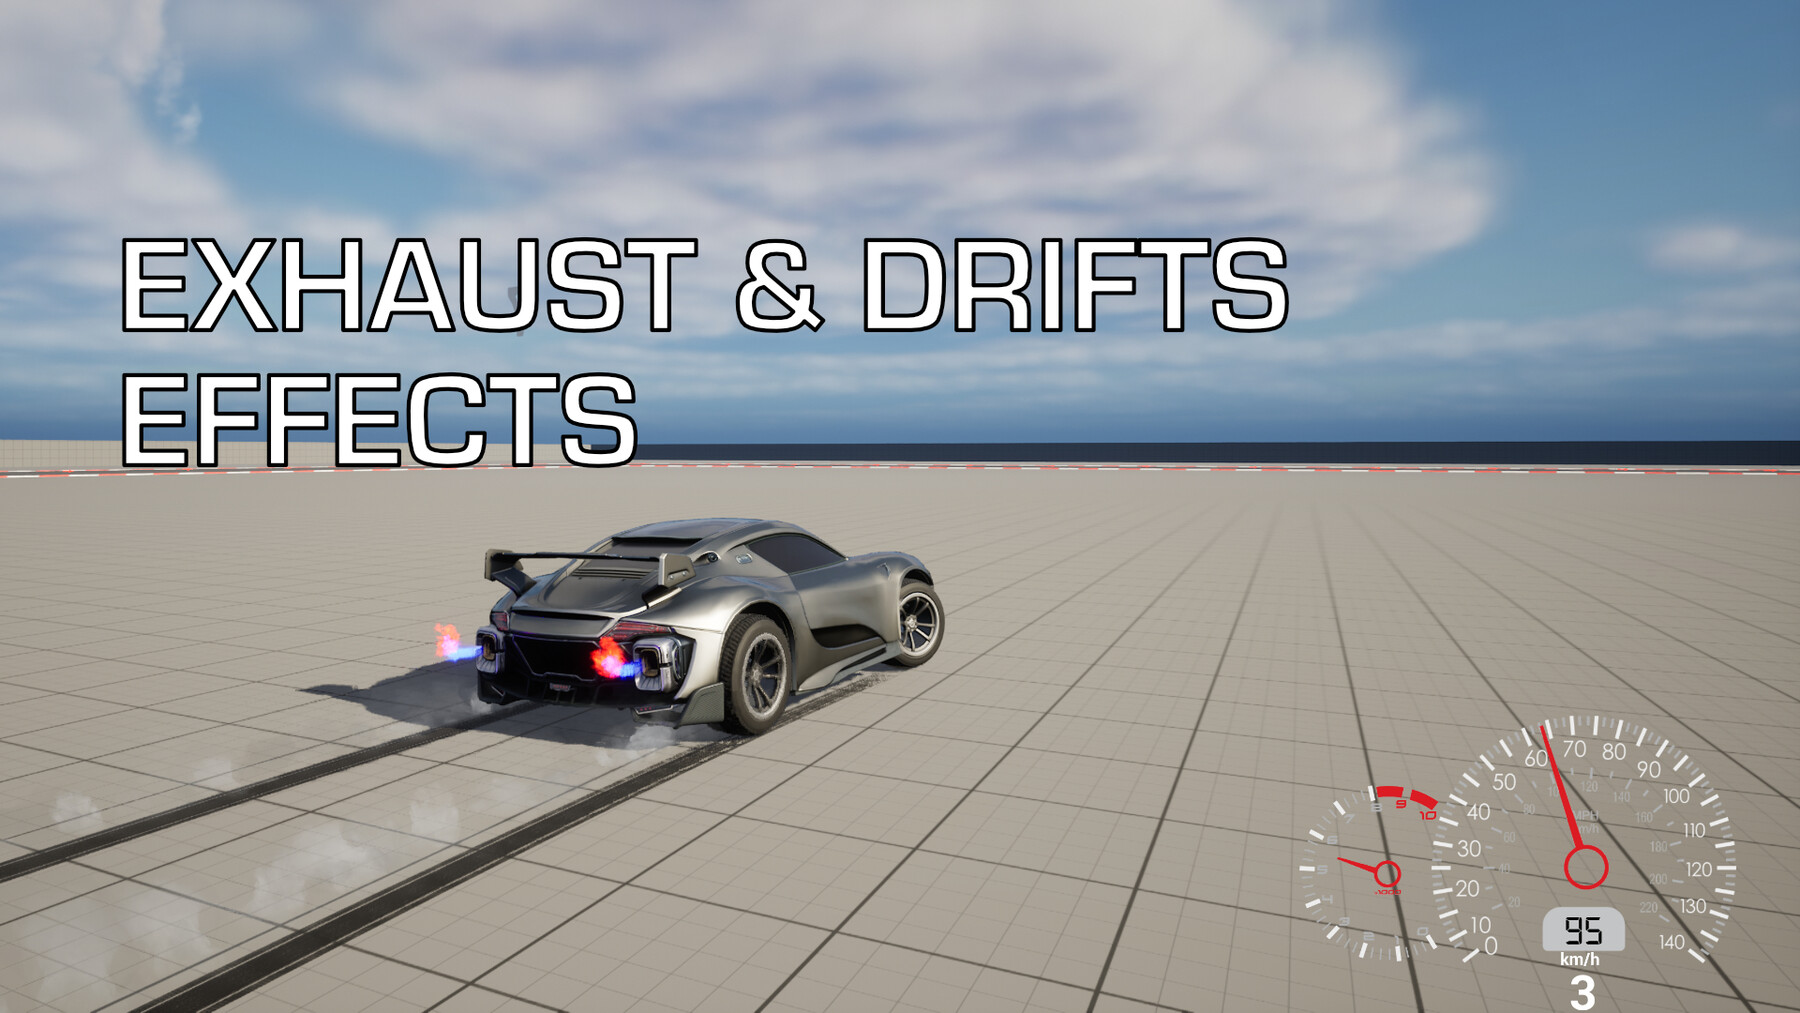 Multiplayer Car Racing Game in Blueprints - UE Marketplace